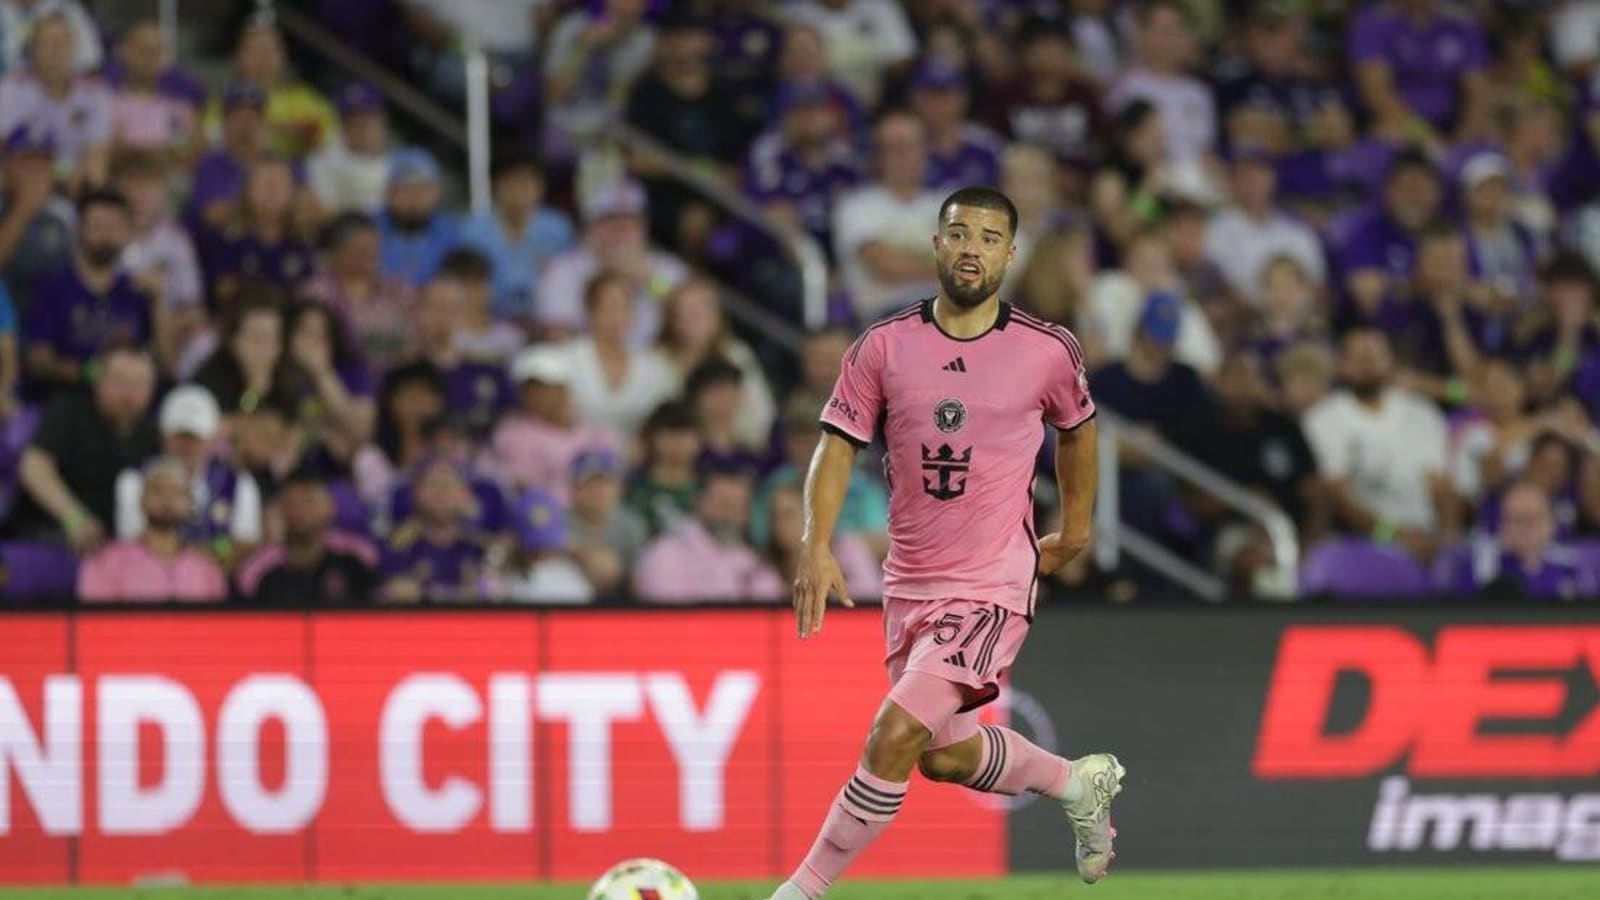 Without Lionel Messi, Miam draws with Orlando City